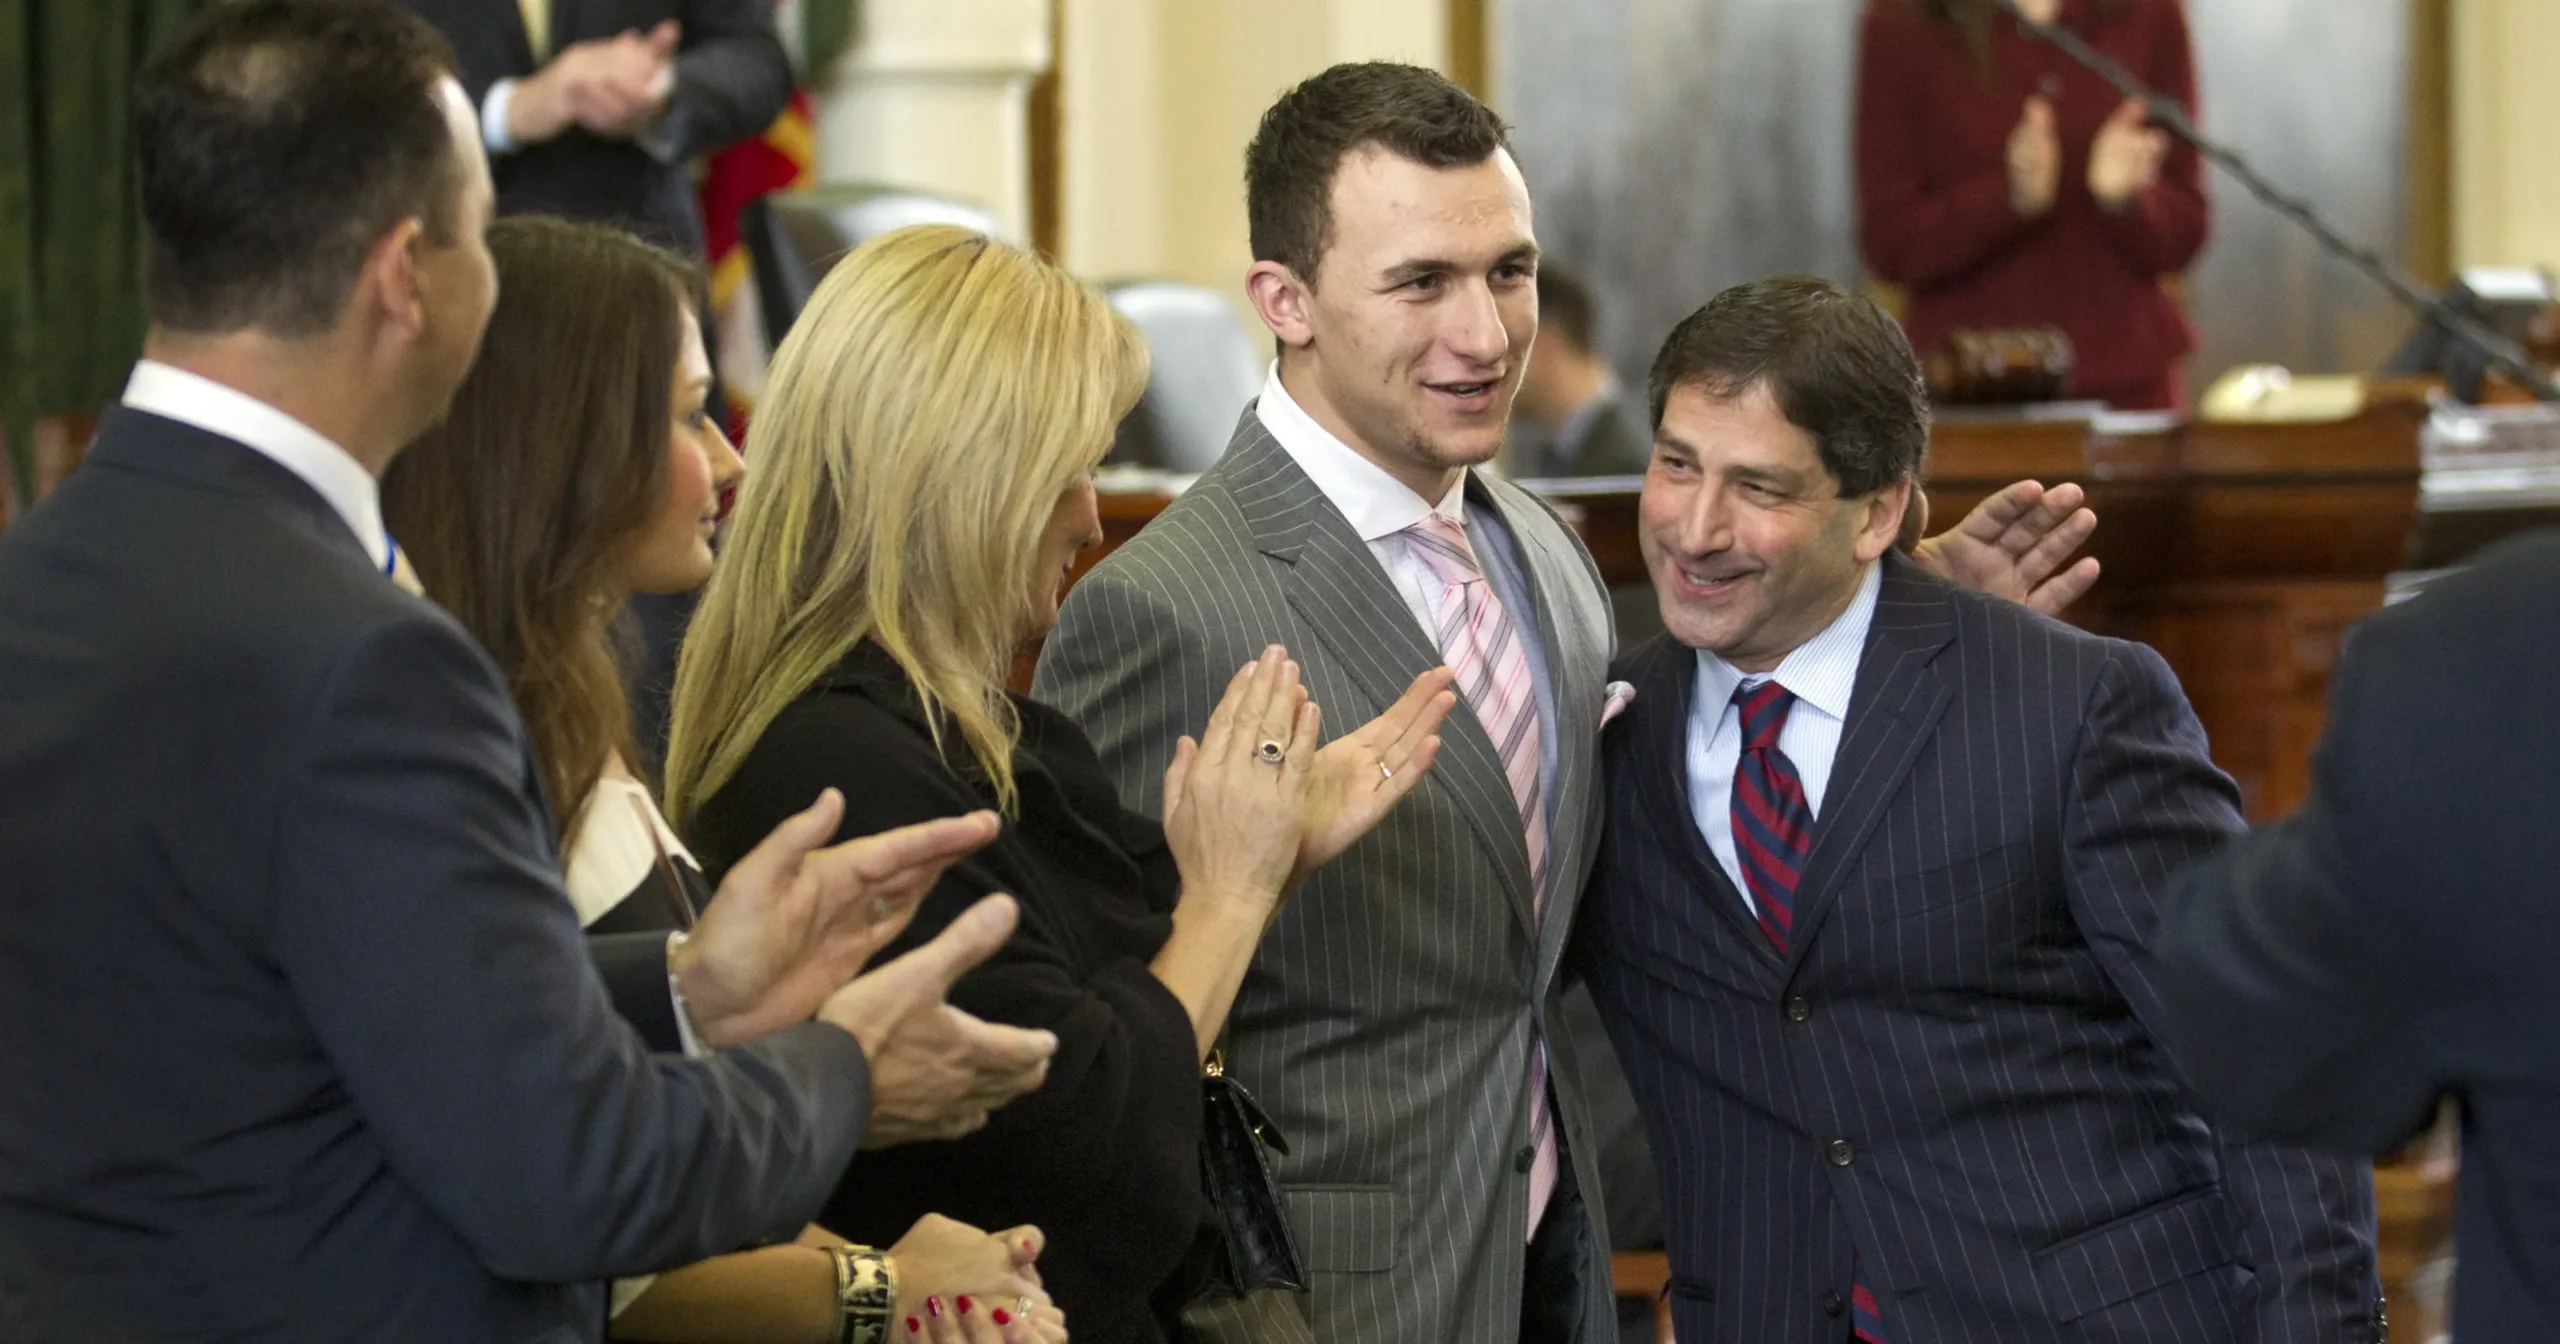 Former Texas A&M quarterback and Heisman Trophy winner Johnny Manziel (second from right) says he'll avoid attending the Heisman Trophy ceremony until former winner Reggie Bush is welcomed back. Bush had his Heisman honors stripped from him by the trust and the NCAA following NCAA violations. (Photo courtesy of USATODAY.COM)